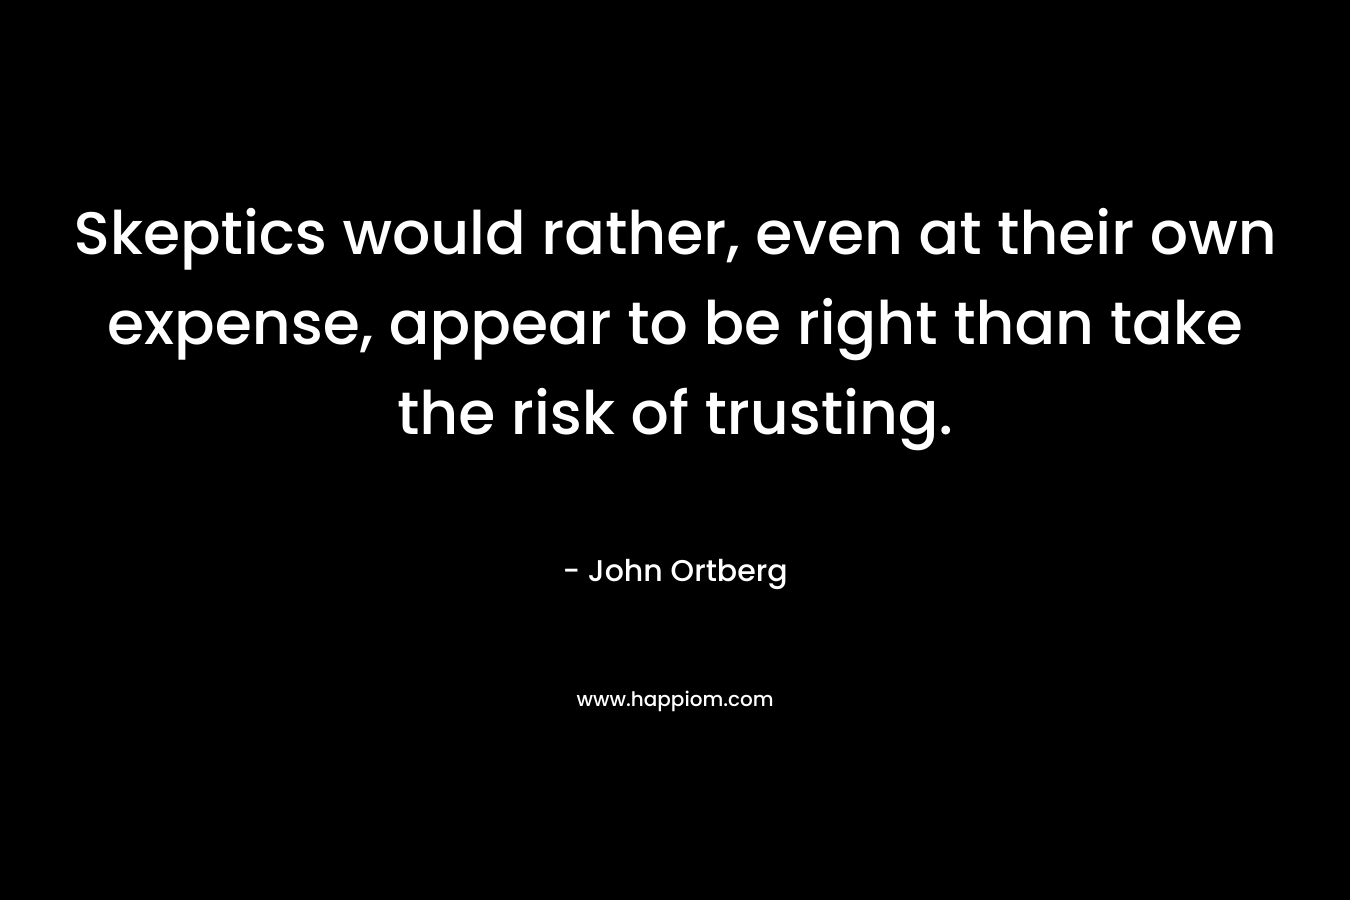 Skeptics would rather, even at their own expense, appear to be right than take the risk of trusting. – John Ortberg